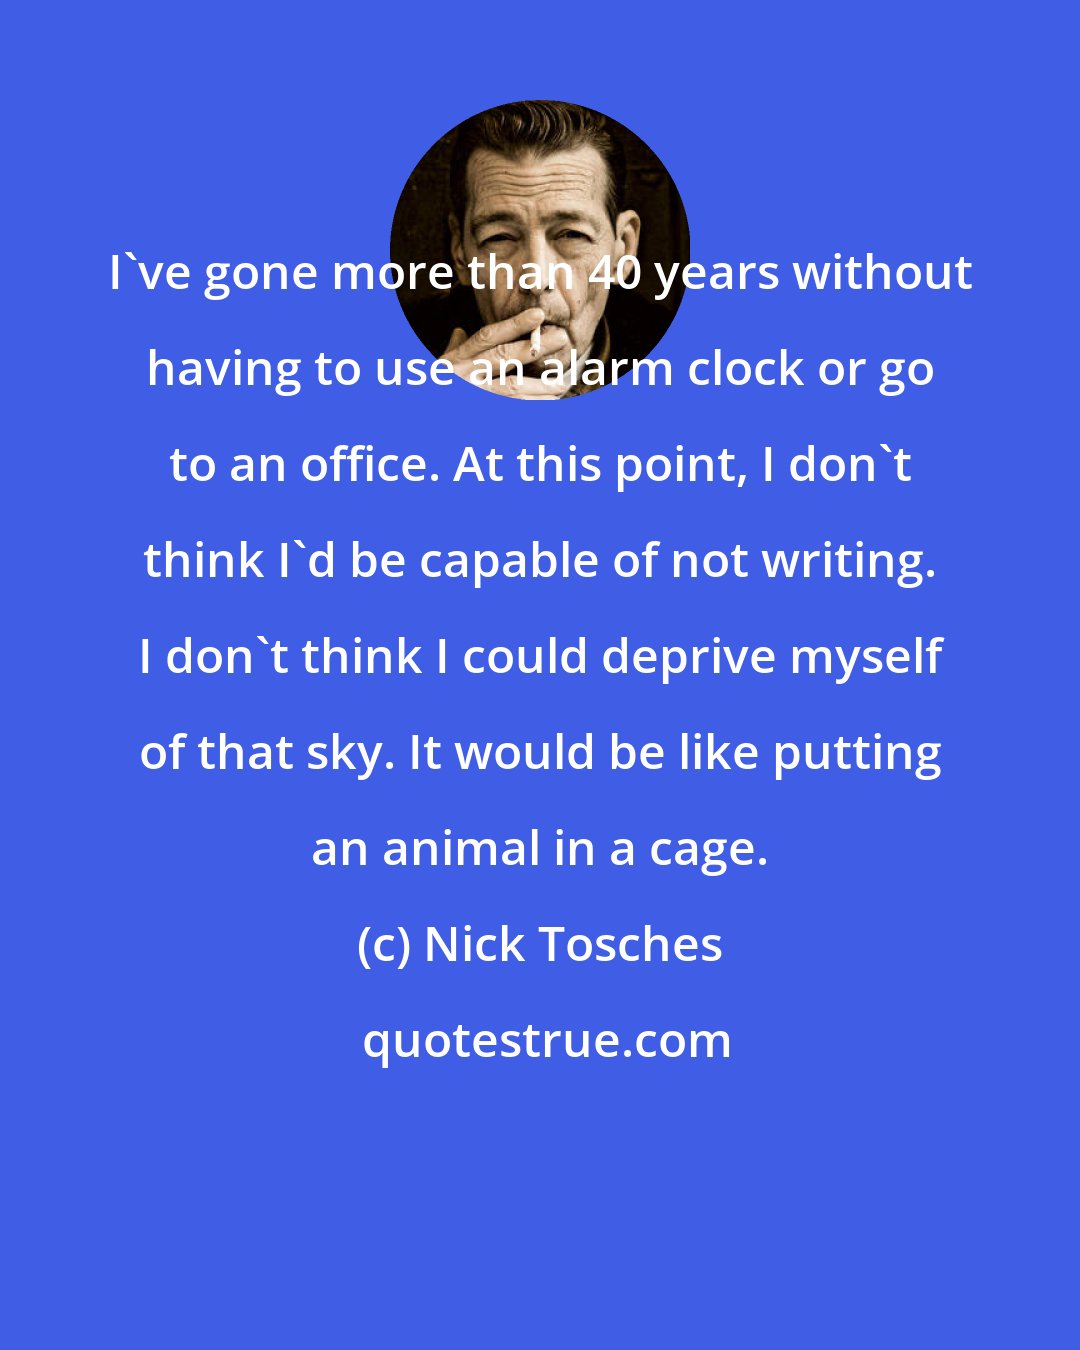 Nick Tosches: I've gone more than 40 years without having to use an alarm clock or go to an office. At this point, I don't think I'd be capable of not writing. I don't think I could deprive myself of that sky. It would be like putting an animal in a cage.